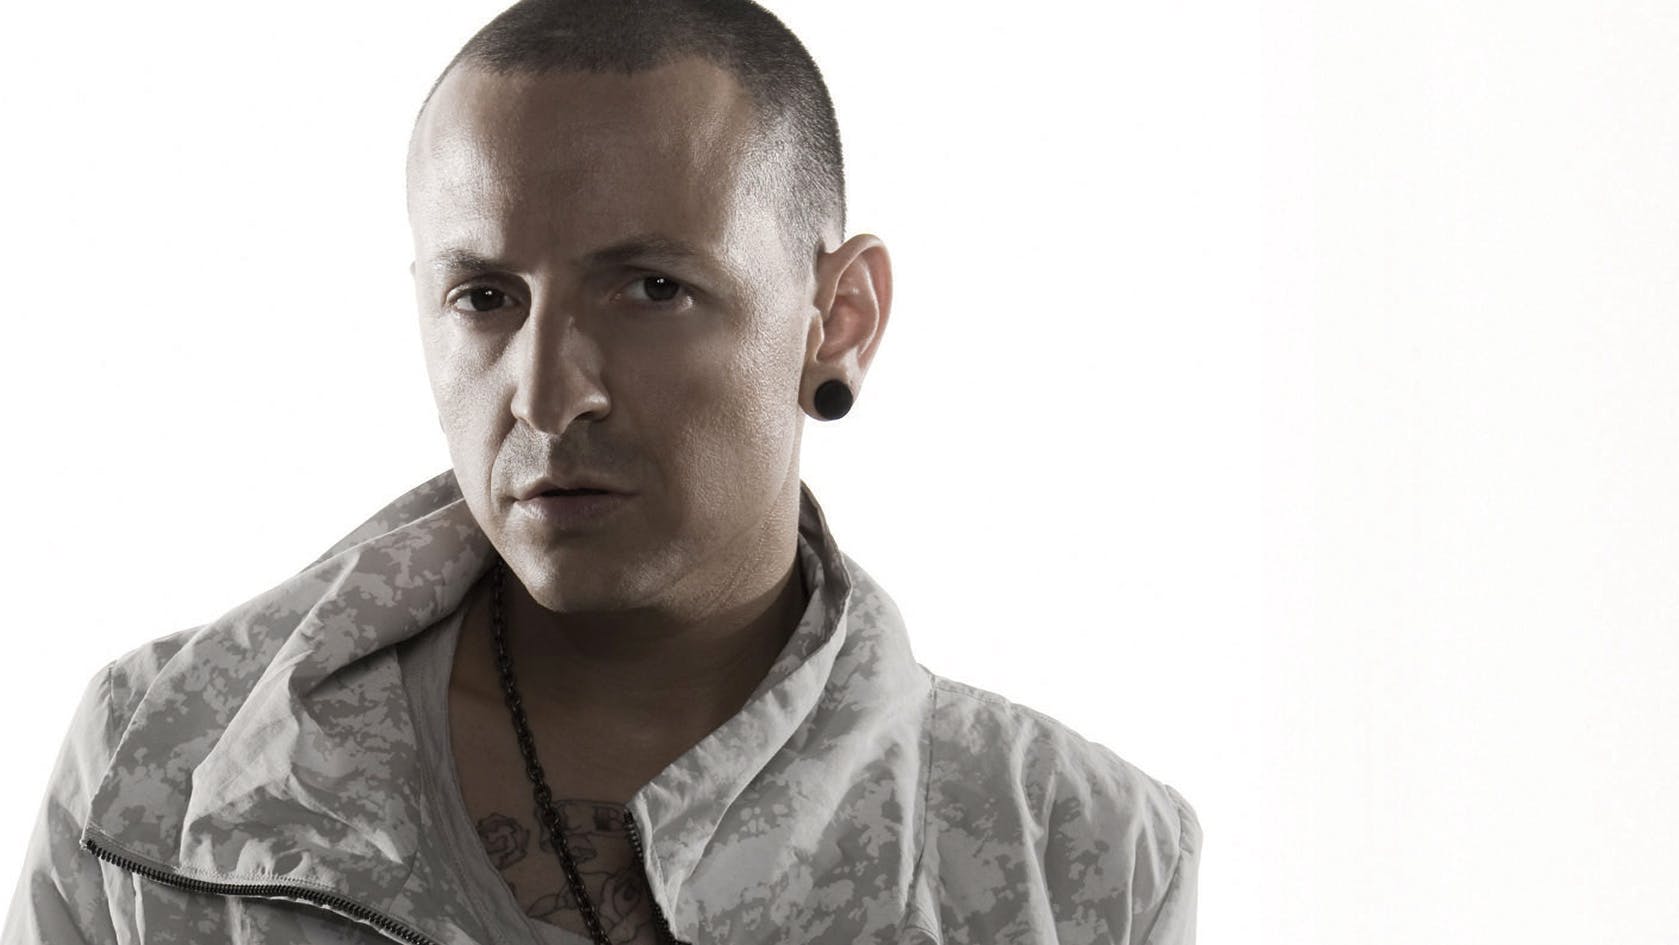 Chester Bennington's First Band Grey Daze To Release New Album Featuring His Vocals